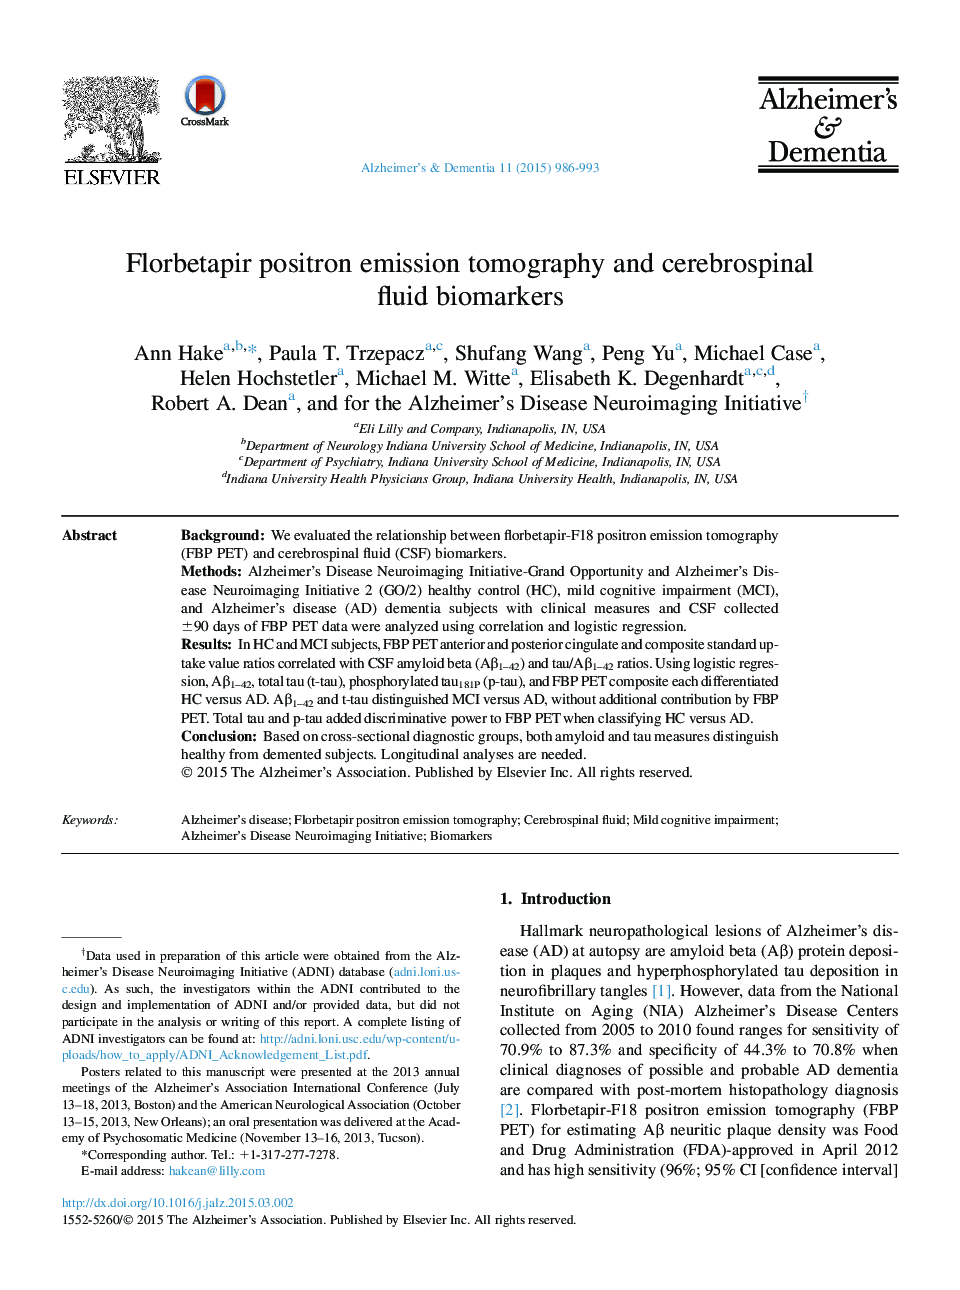 Featured ArticleFlorbetapir positron emission tomography and cerebrospinal fluidÂ biomarkers